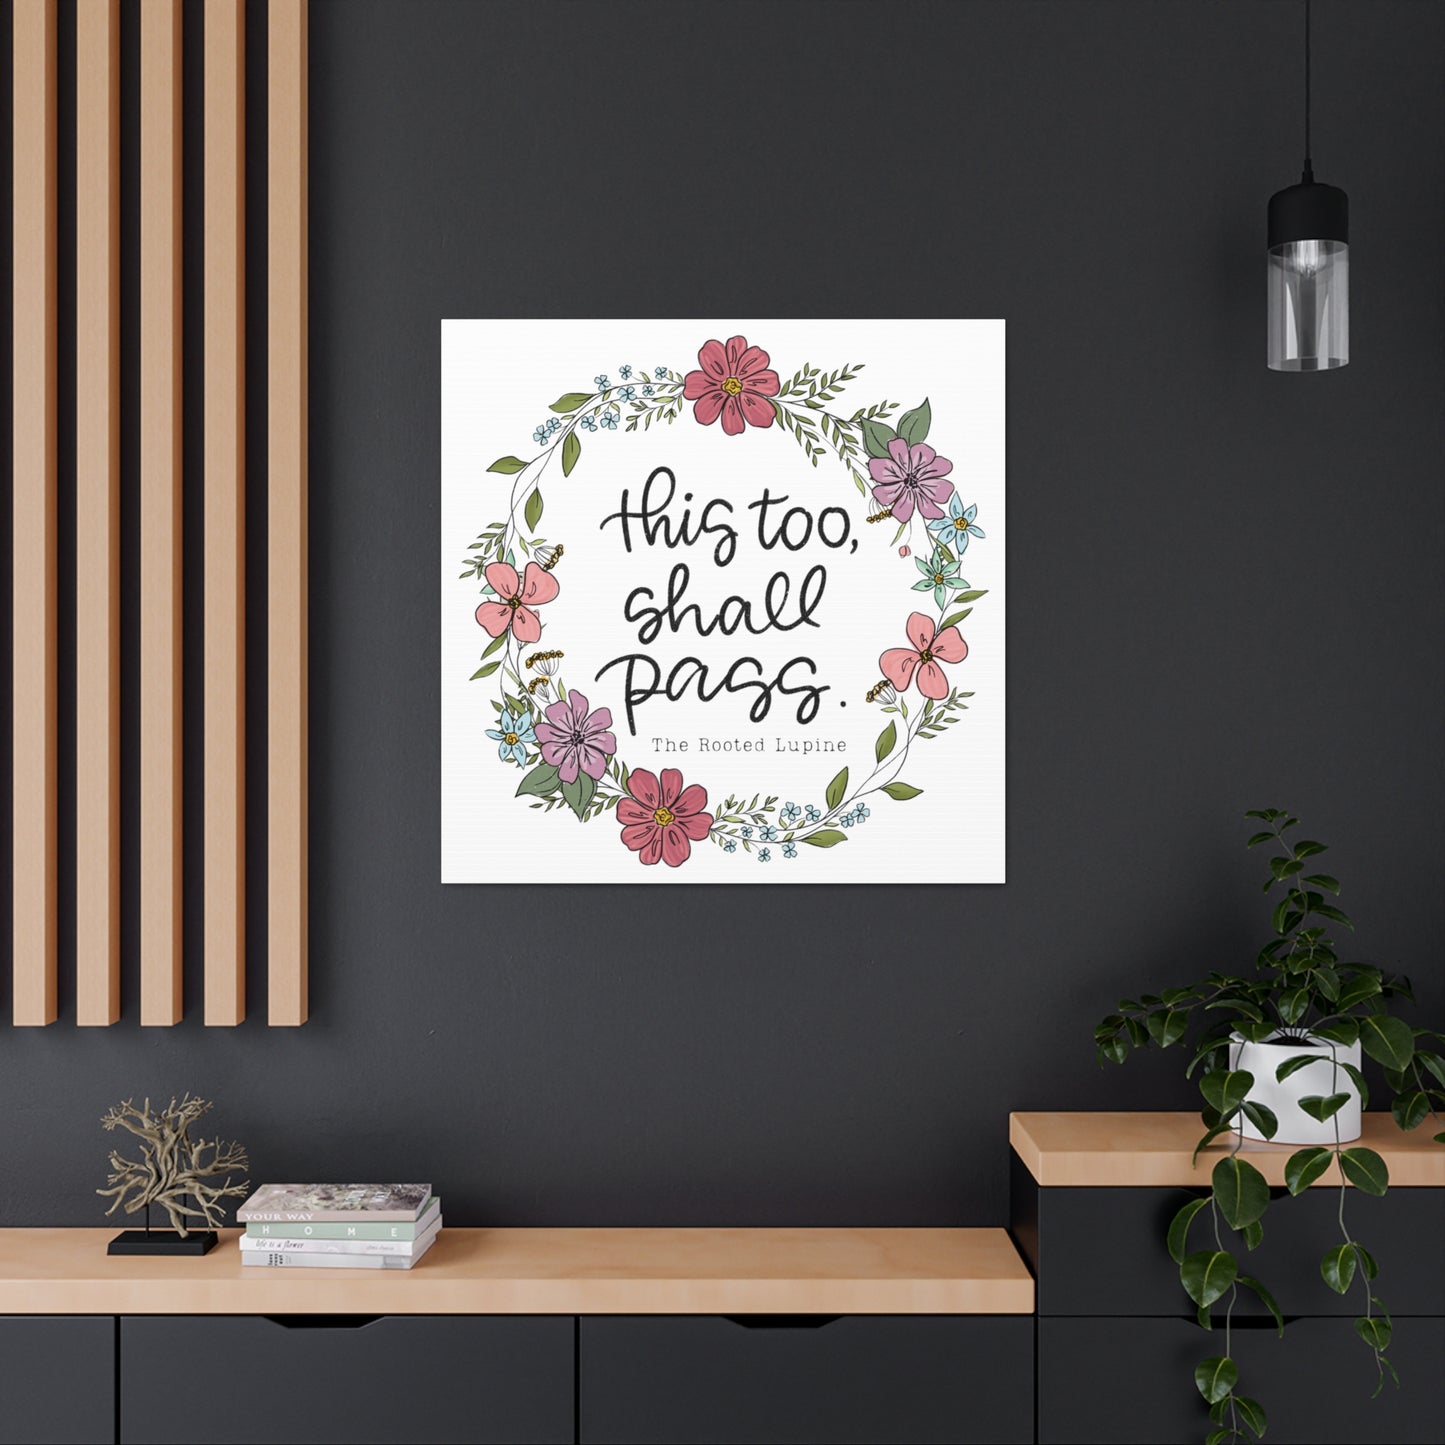 This too shall pass, Canvas Wall Art